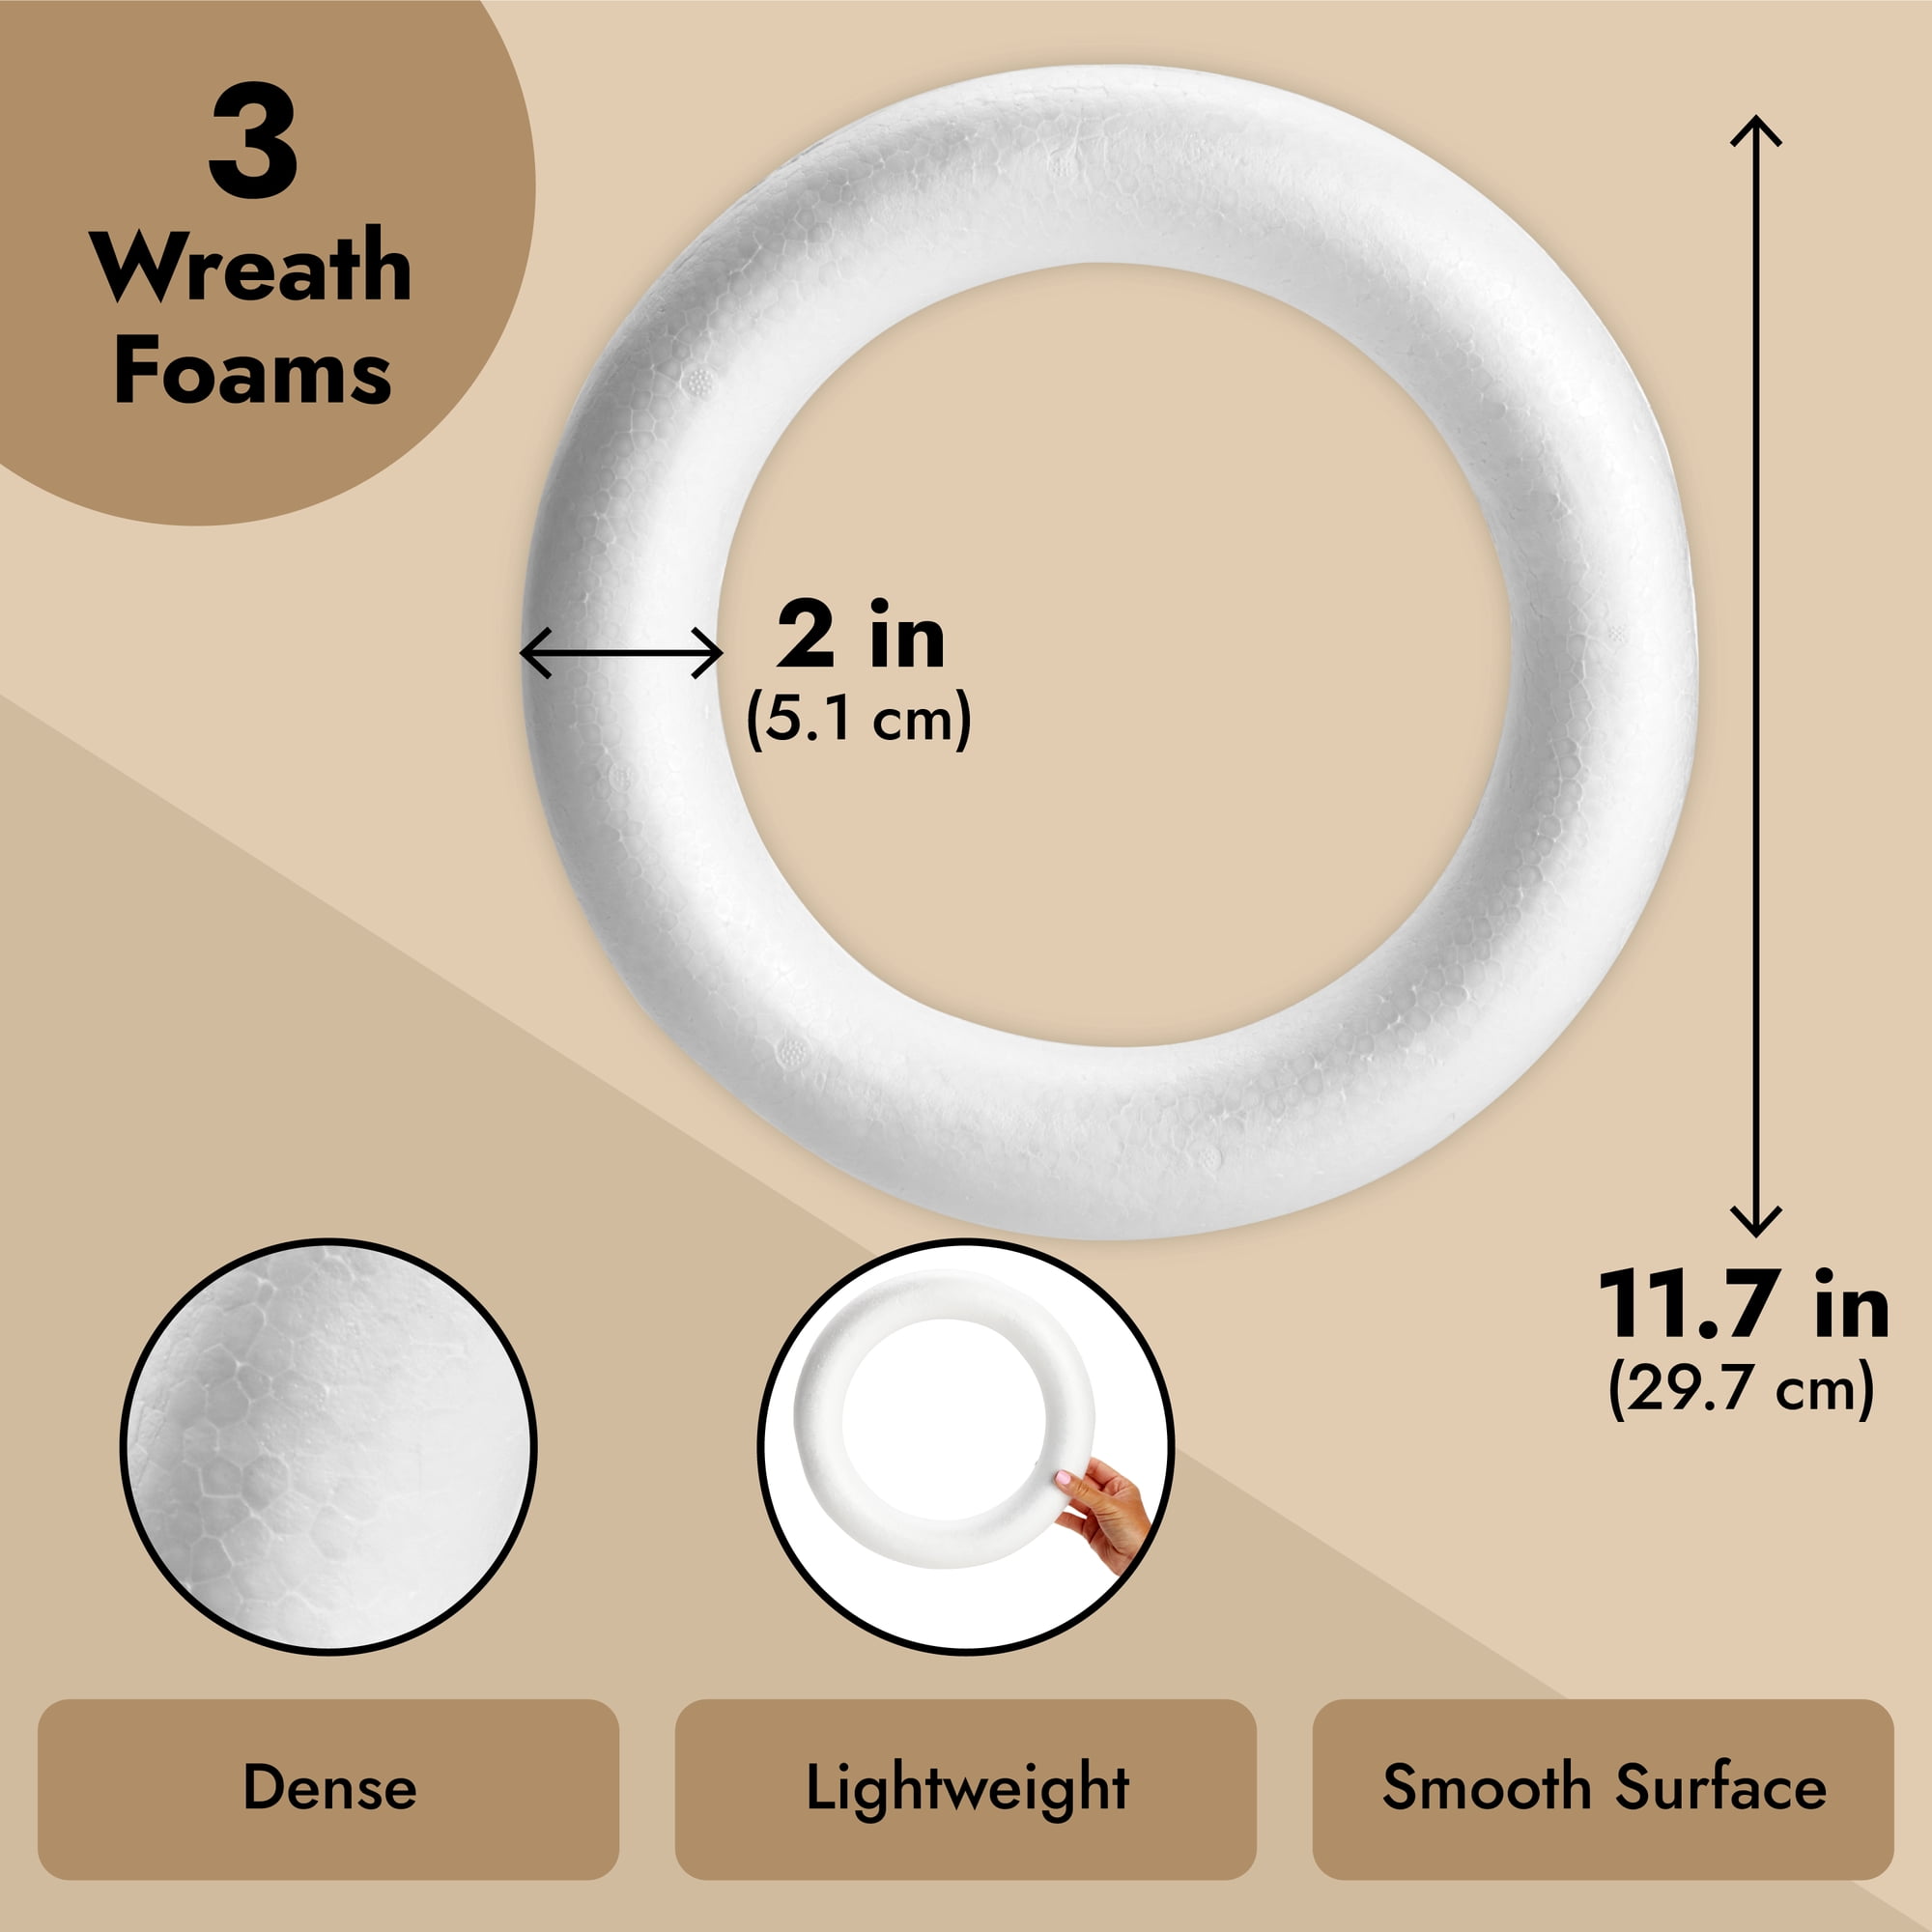 12 inch Foam Wreath Forms, Round Craft Rings for Front Door Christmas Decorations, Holidays, Thanksgiving (3 Pack)